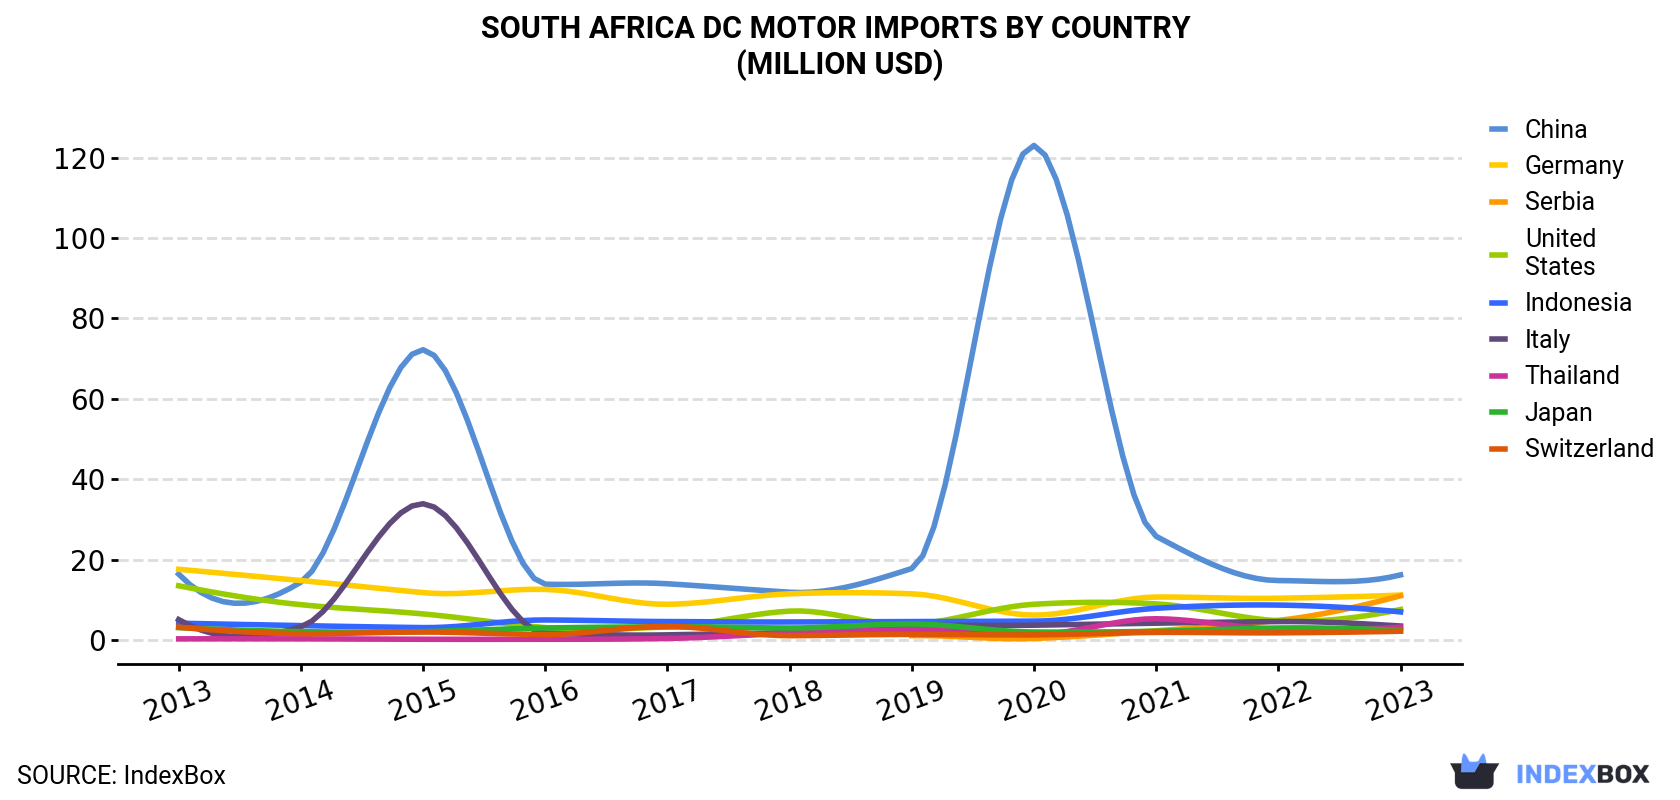 South Africa DC Motor Imports By Country (Million USD)